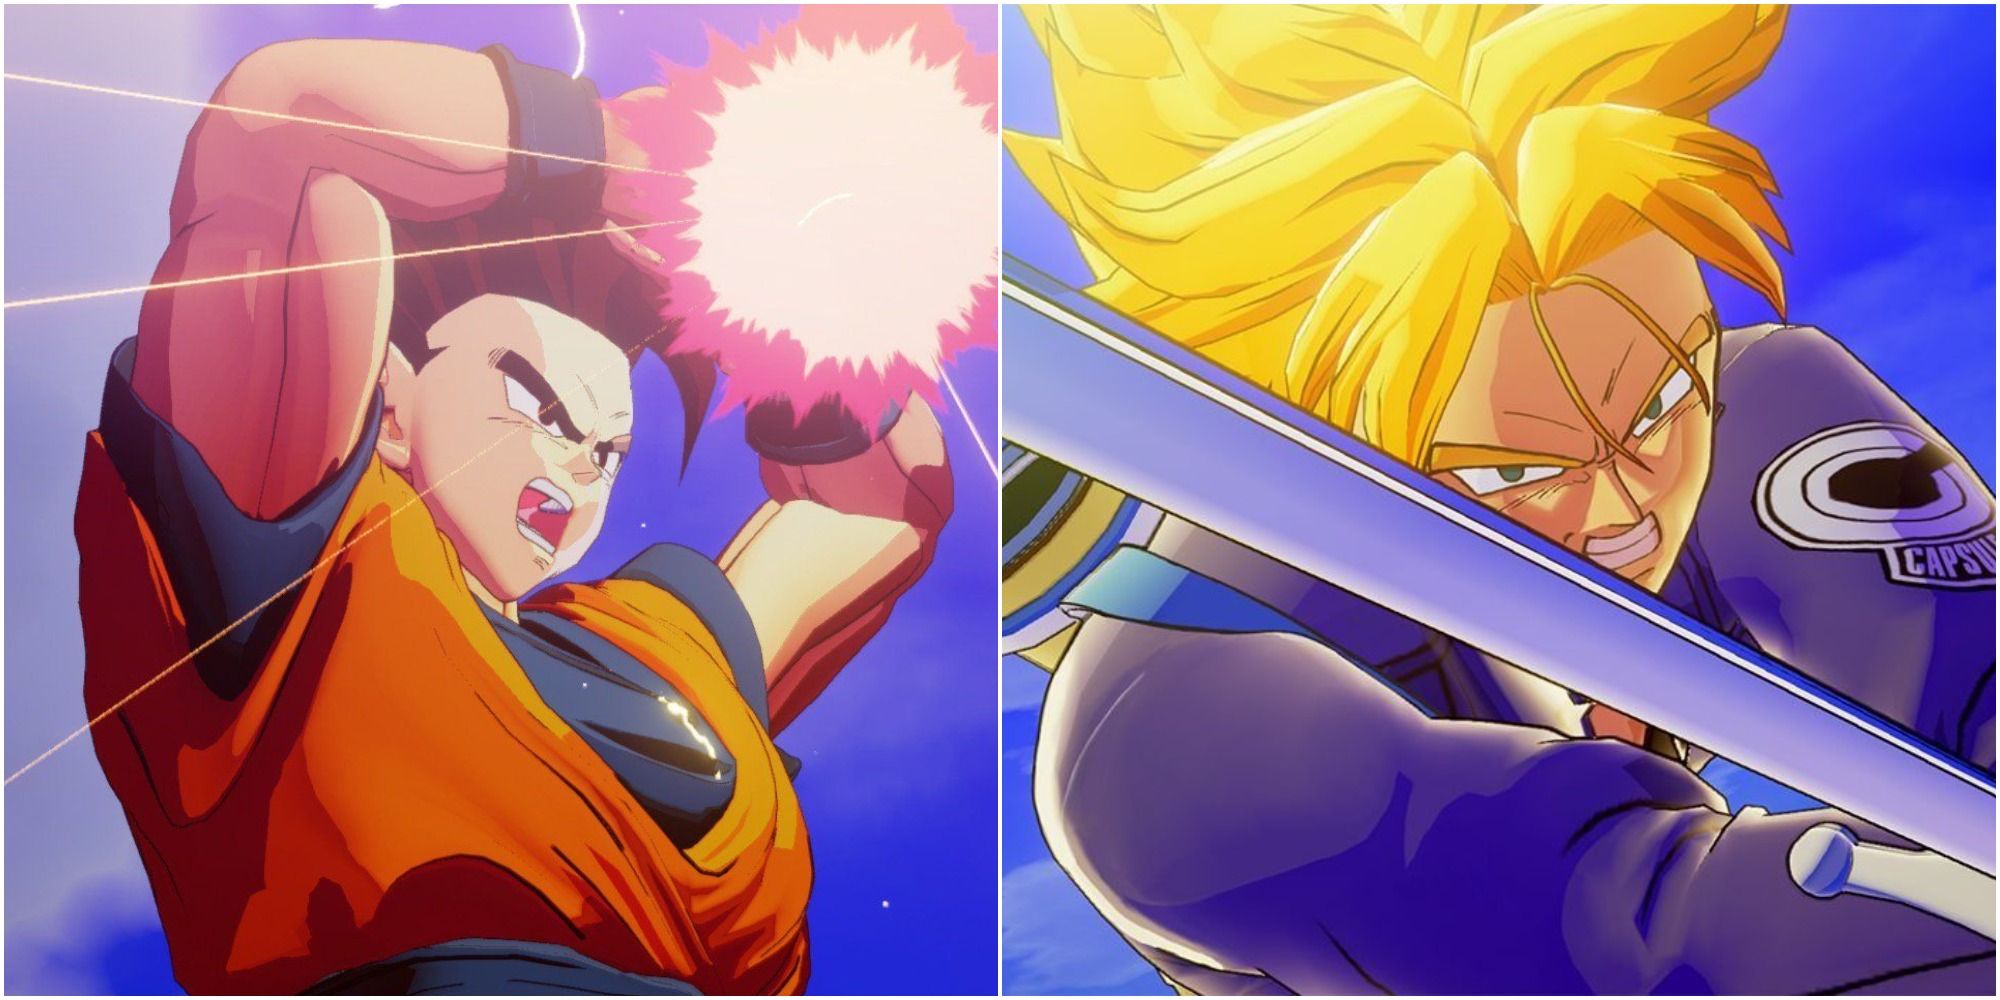 Draw you as dragon ball z character lets go by Jisung208 | Fiverr